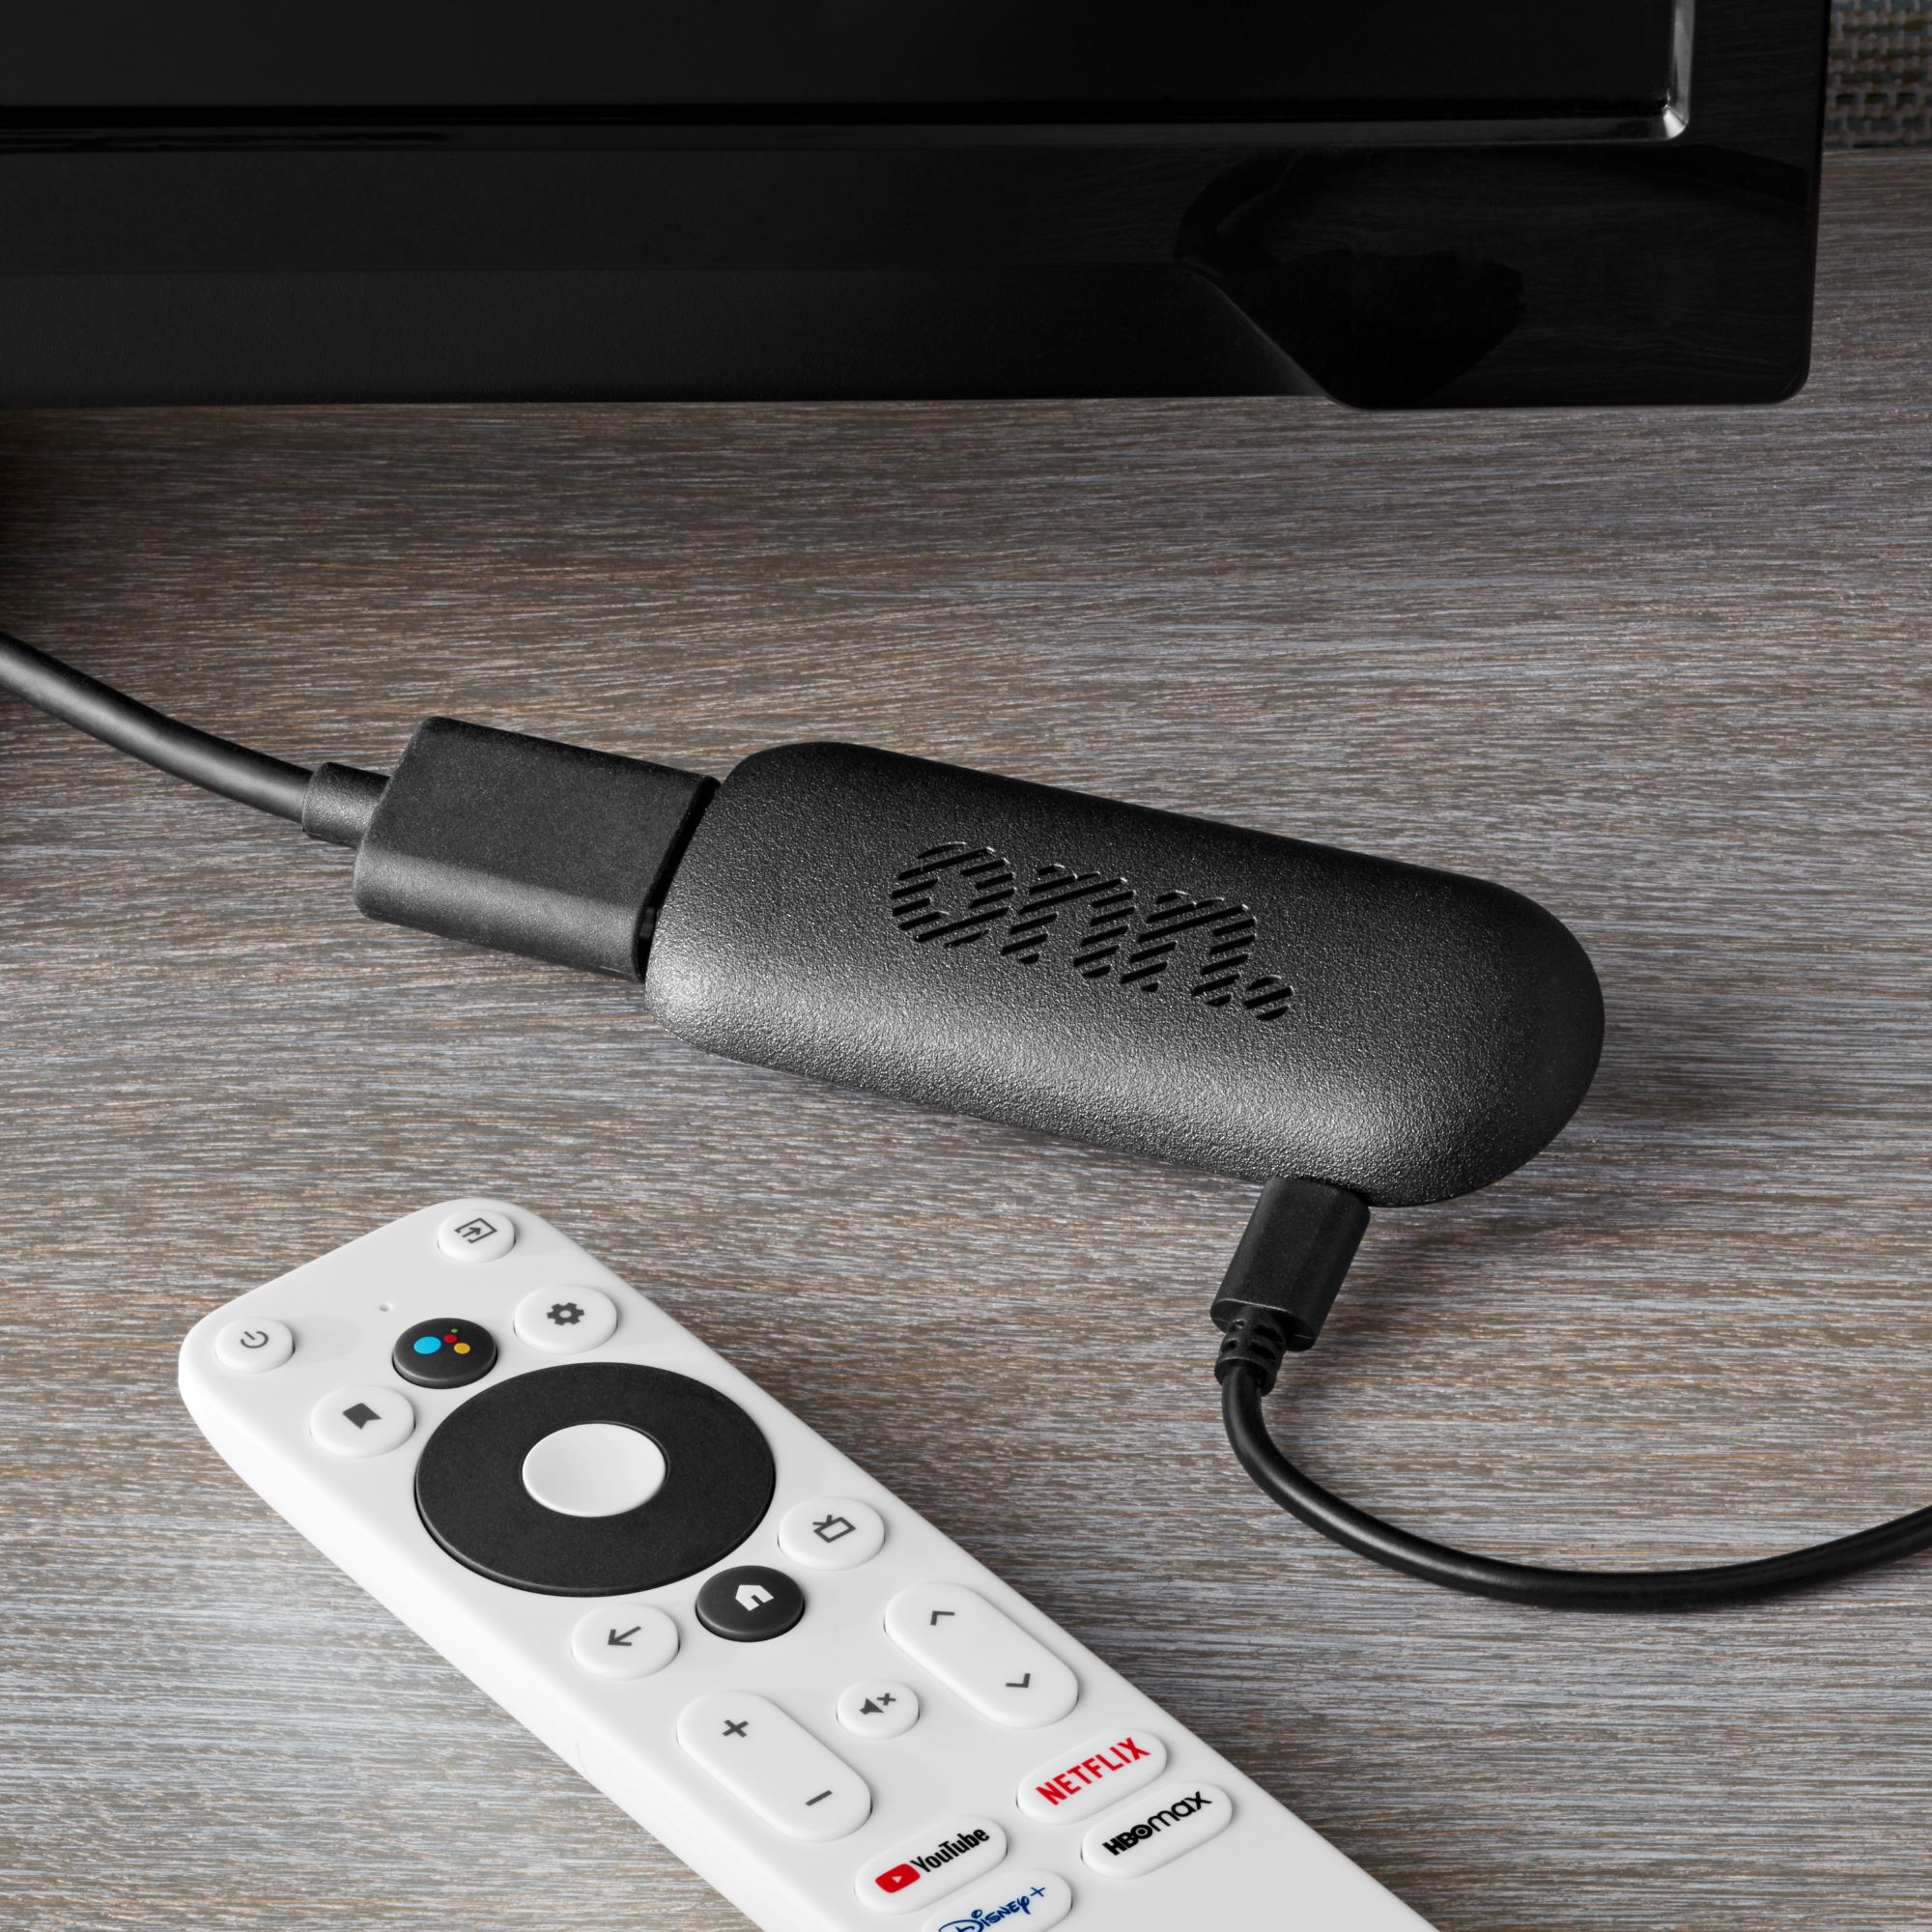 onn. Android TV 2K FHD Streaming Stick with Remote Control & Power Adapter - image 10 of 14